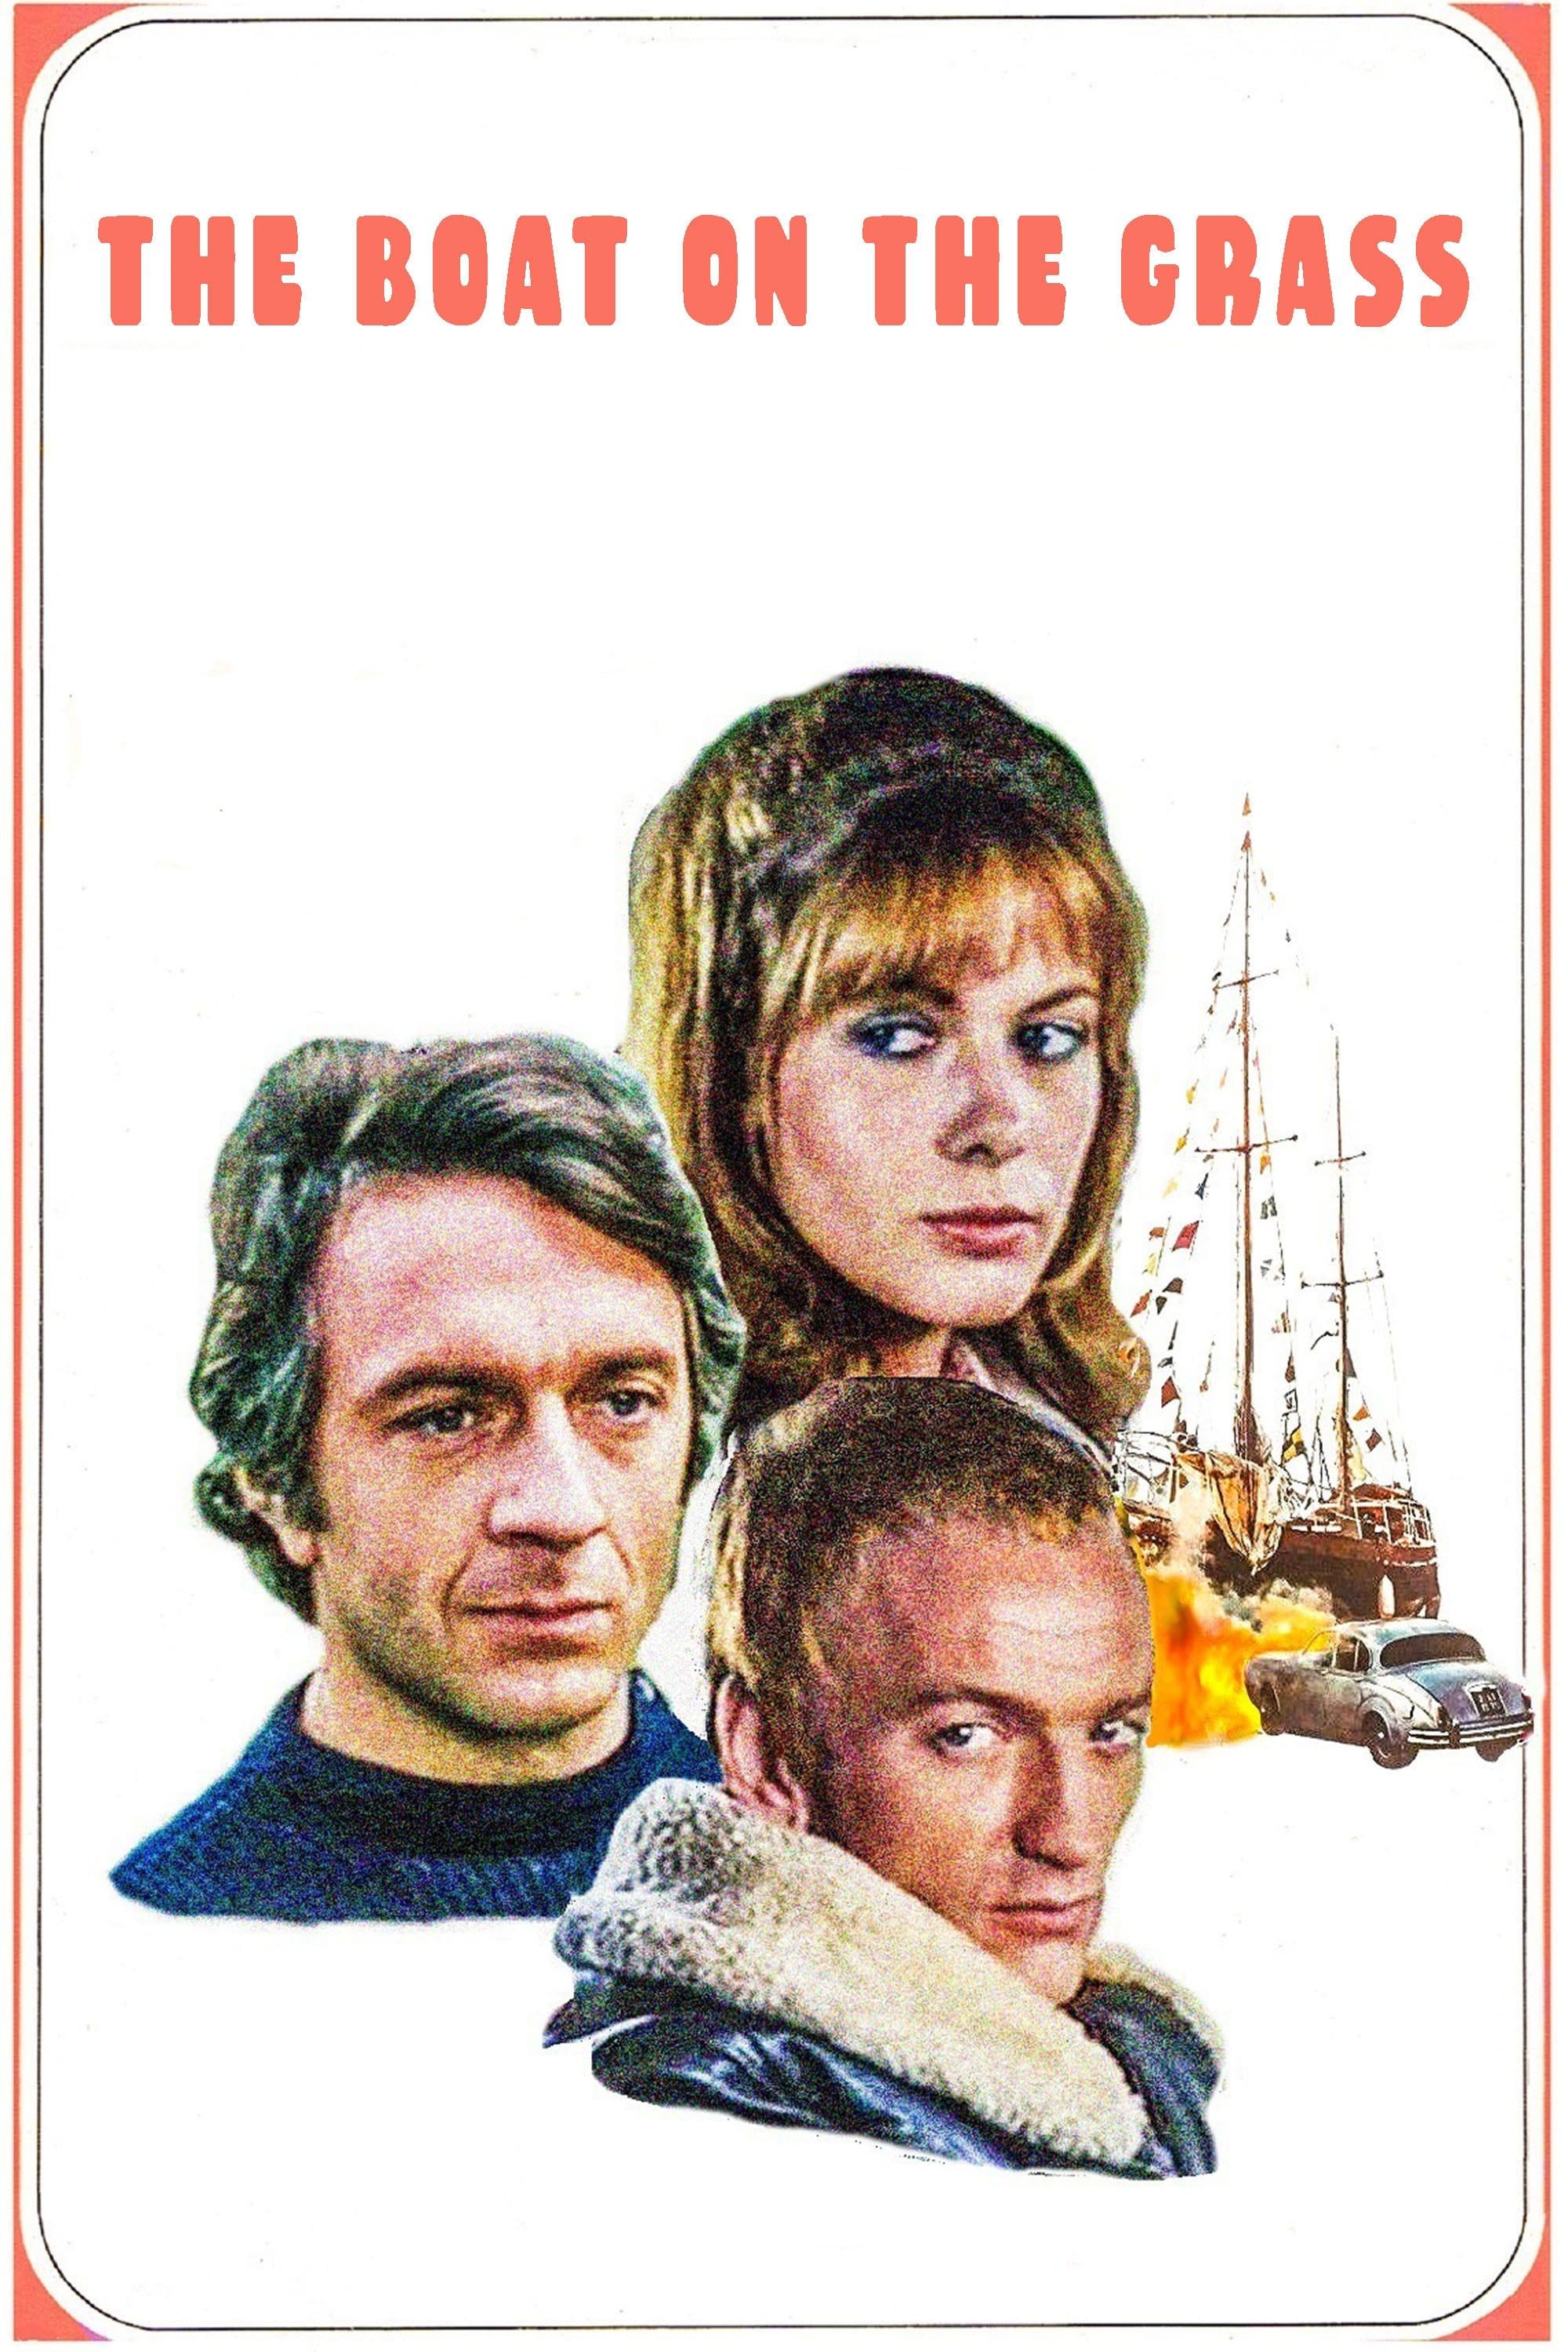 The Boat on the Grass poster